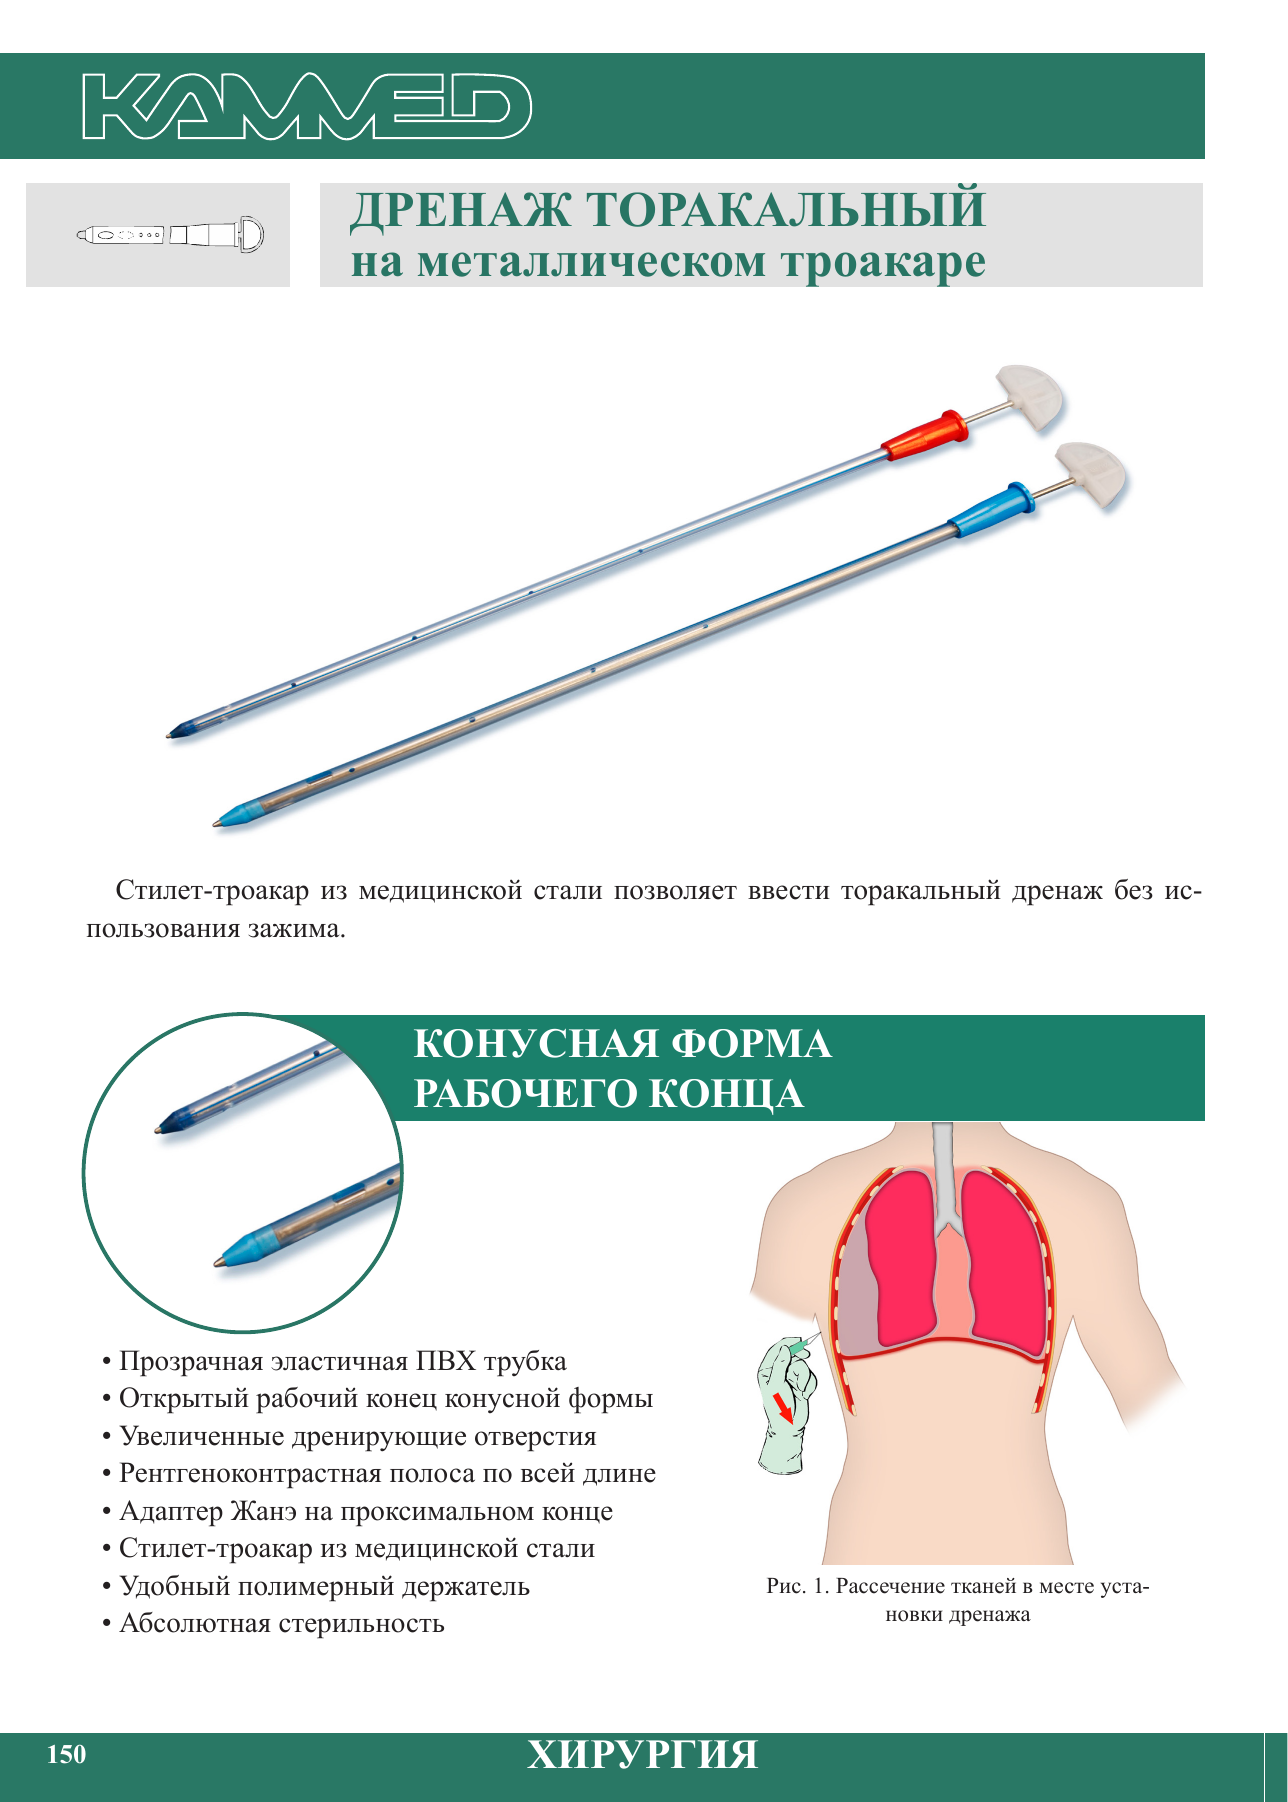 Drainage thoracic metal stylet d.4.0 (pleural) Kammed